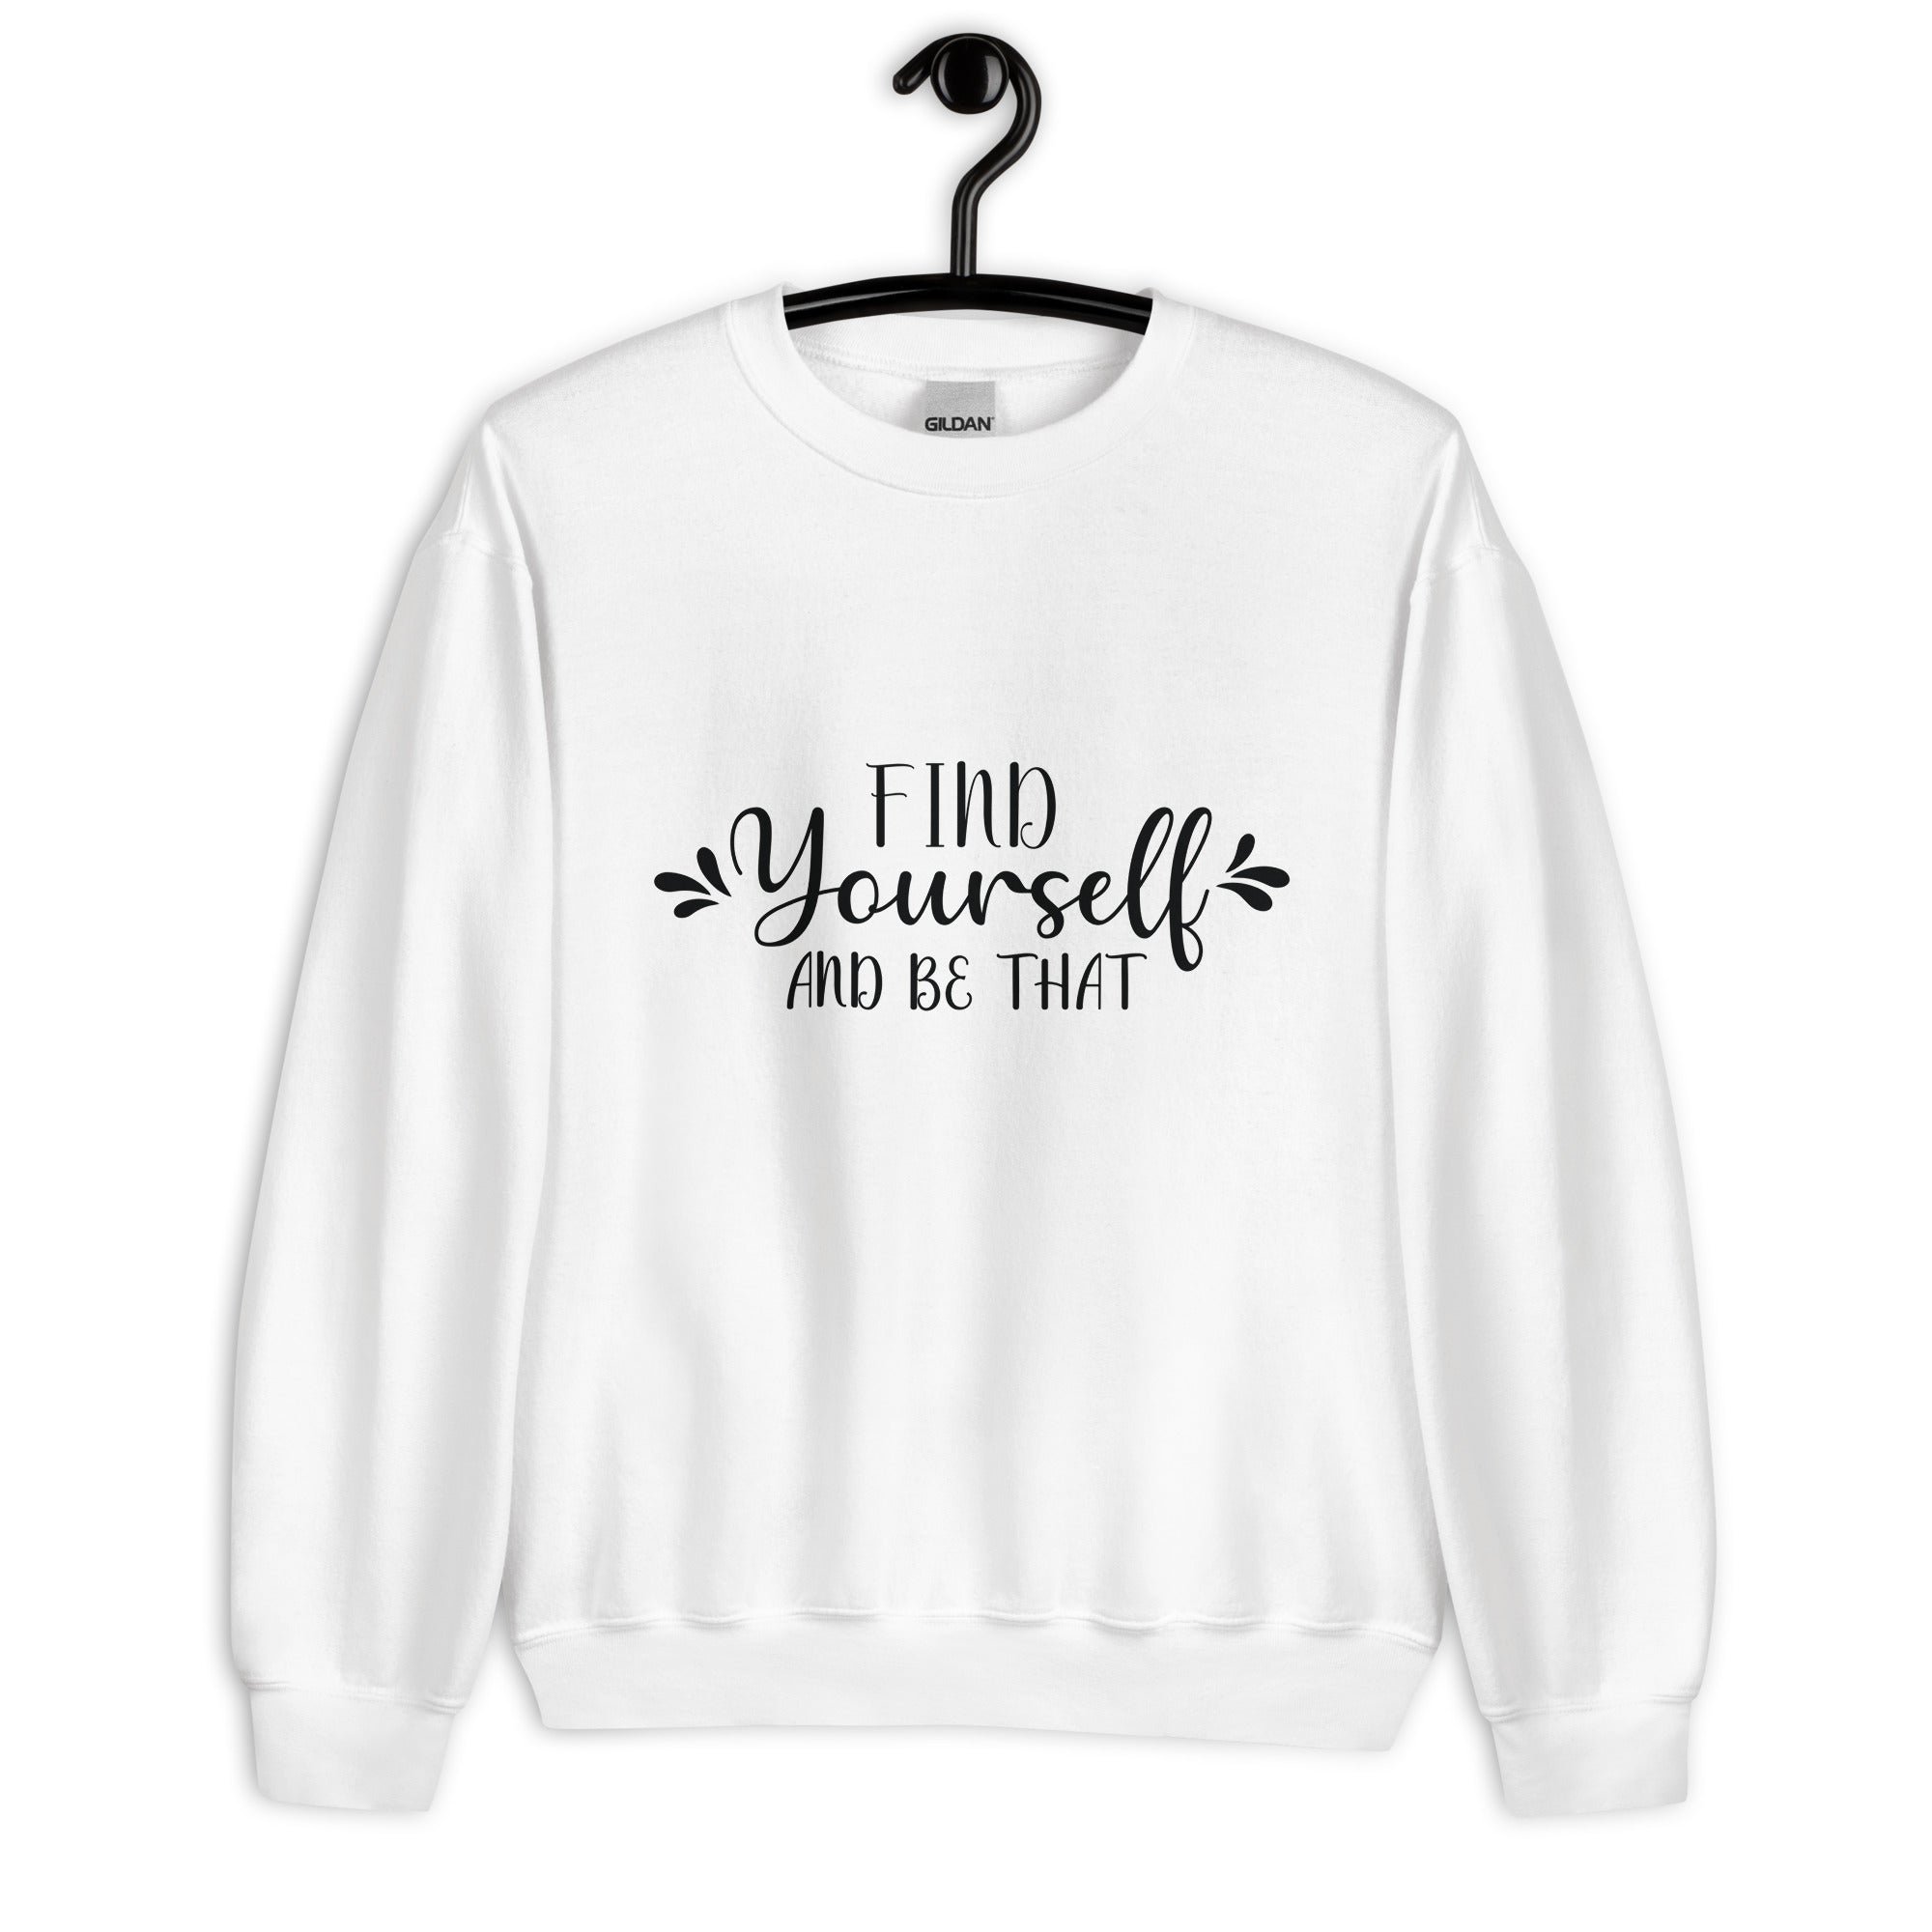 Find Yourself And Be That Women Sweatshirt